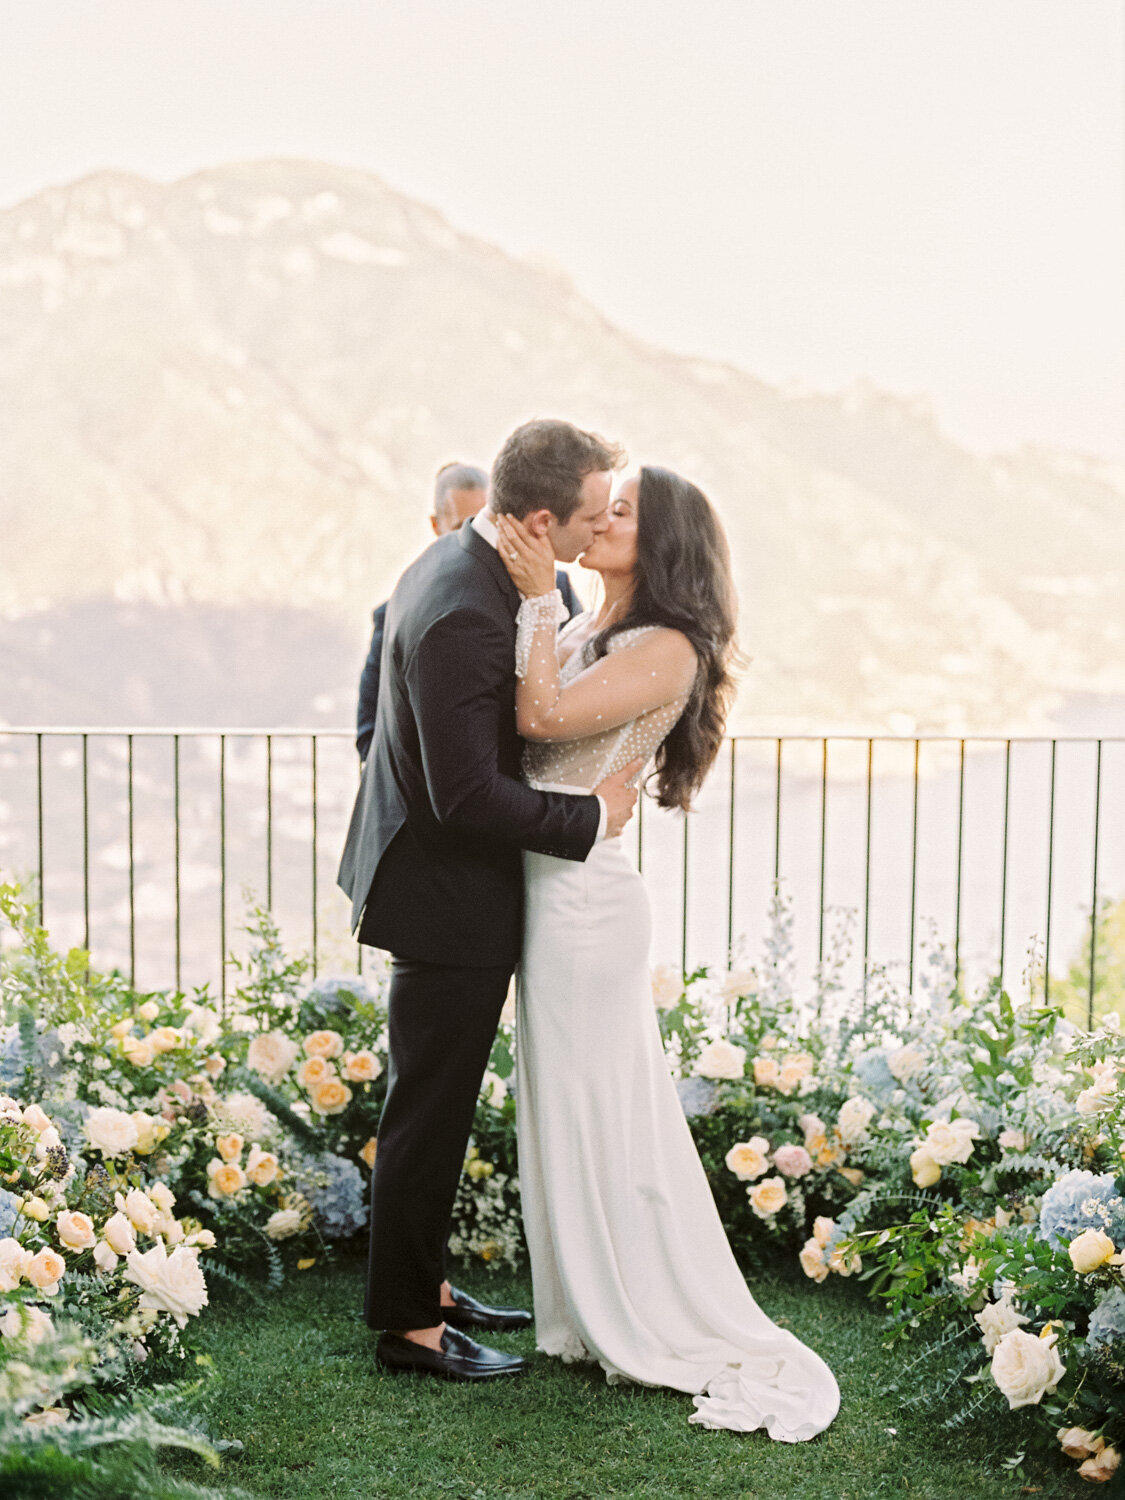 Getting married in Ravello